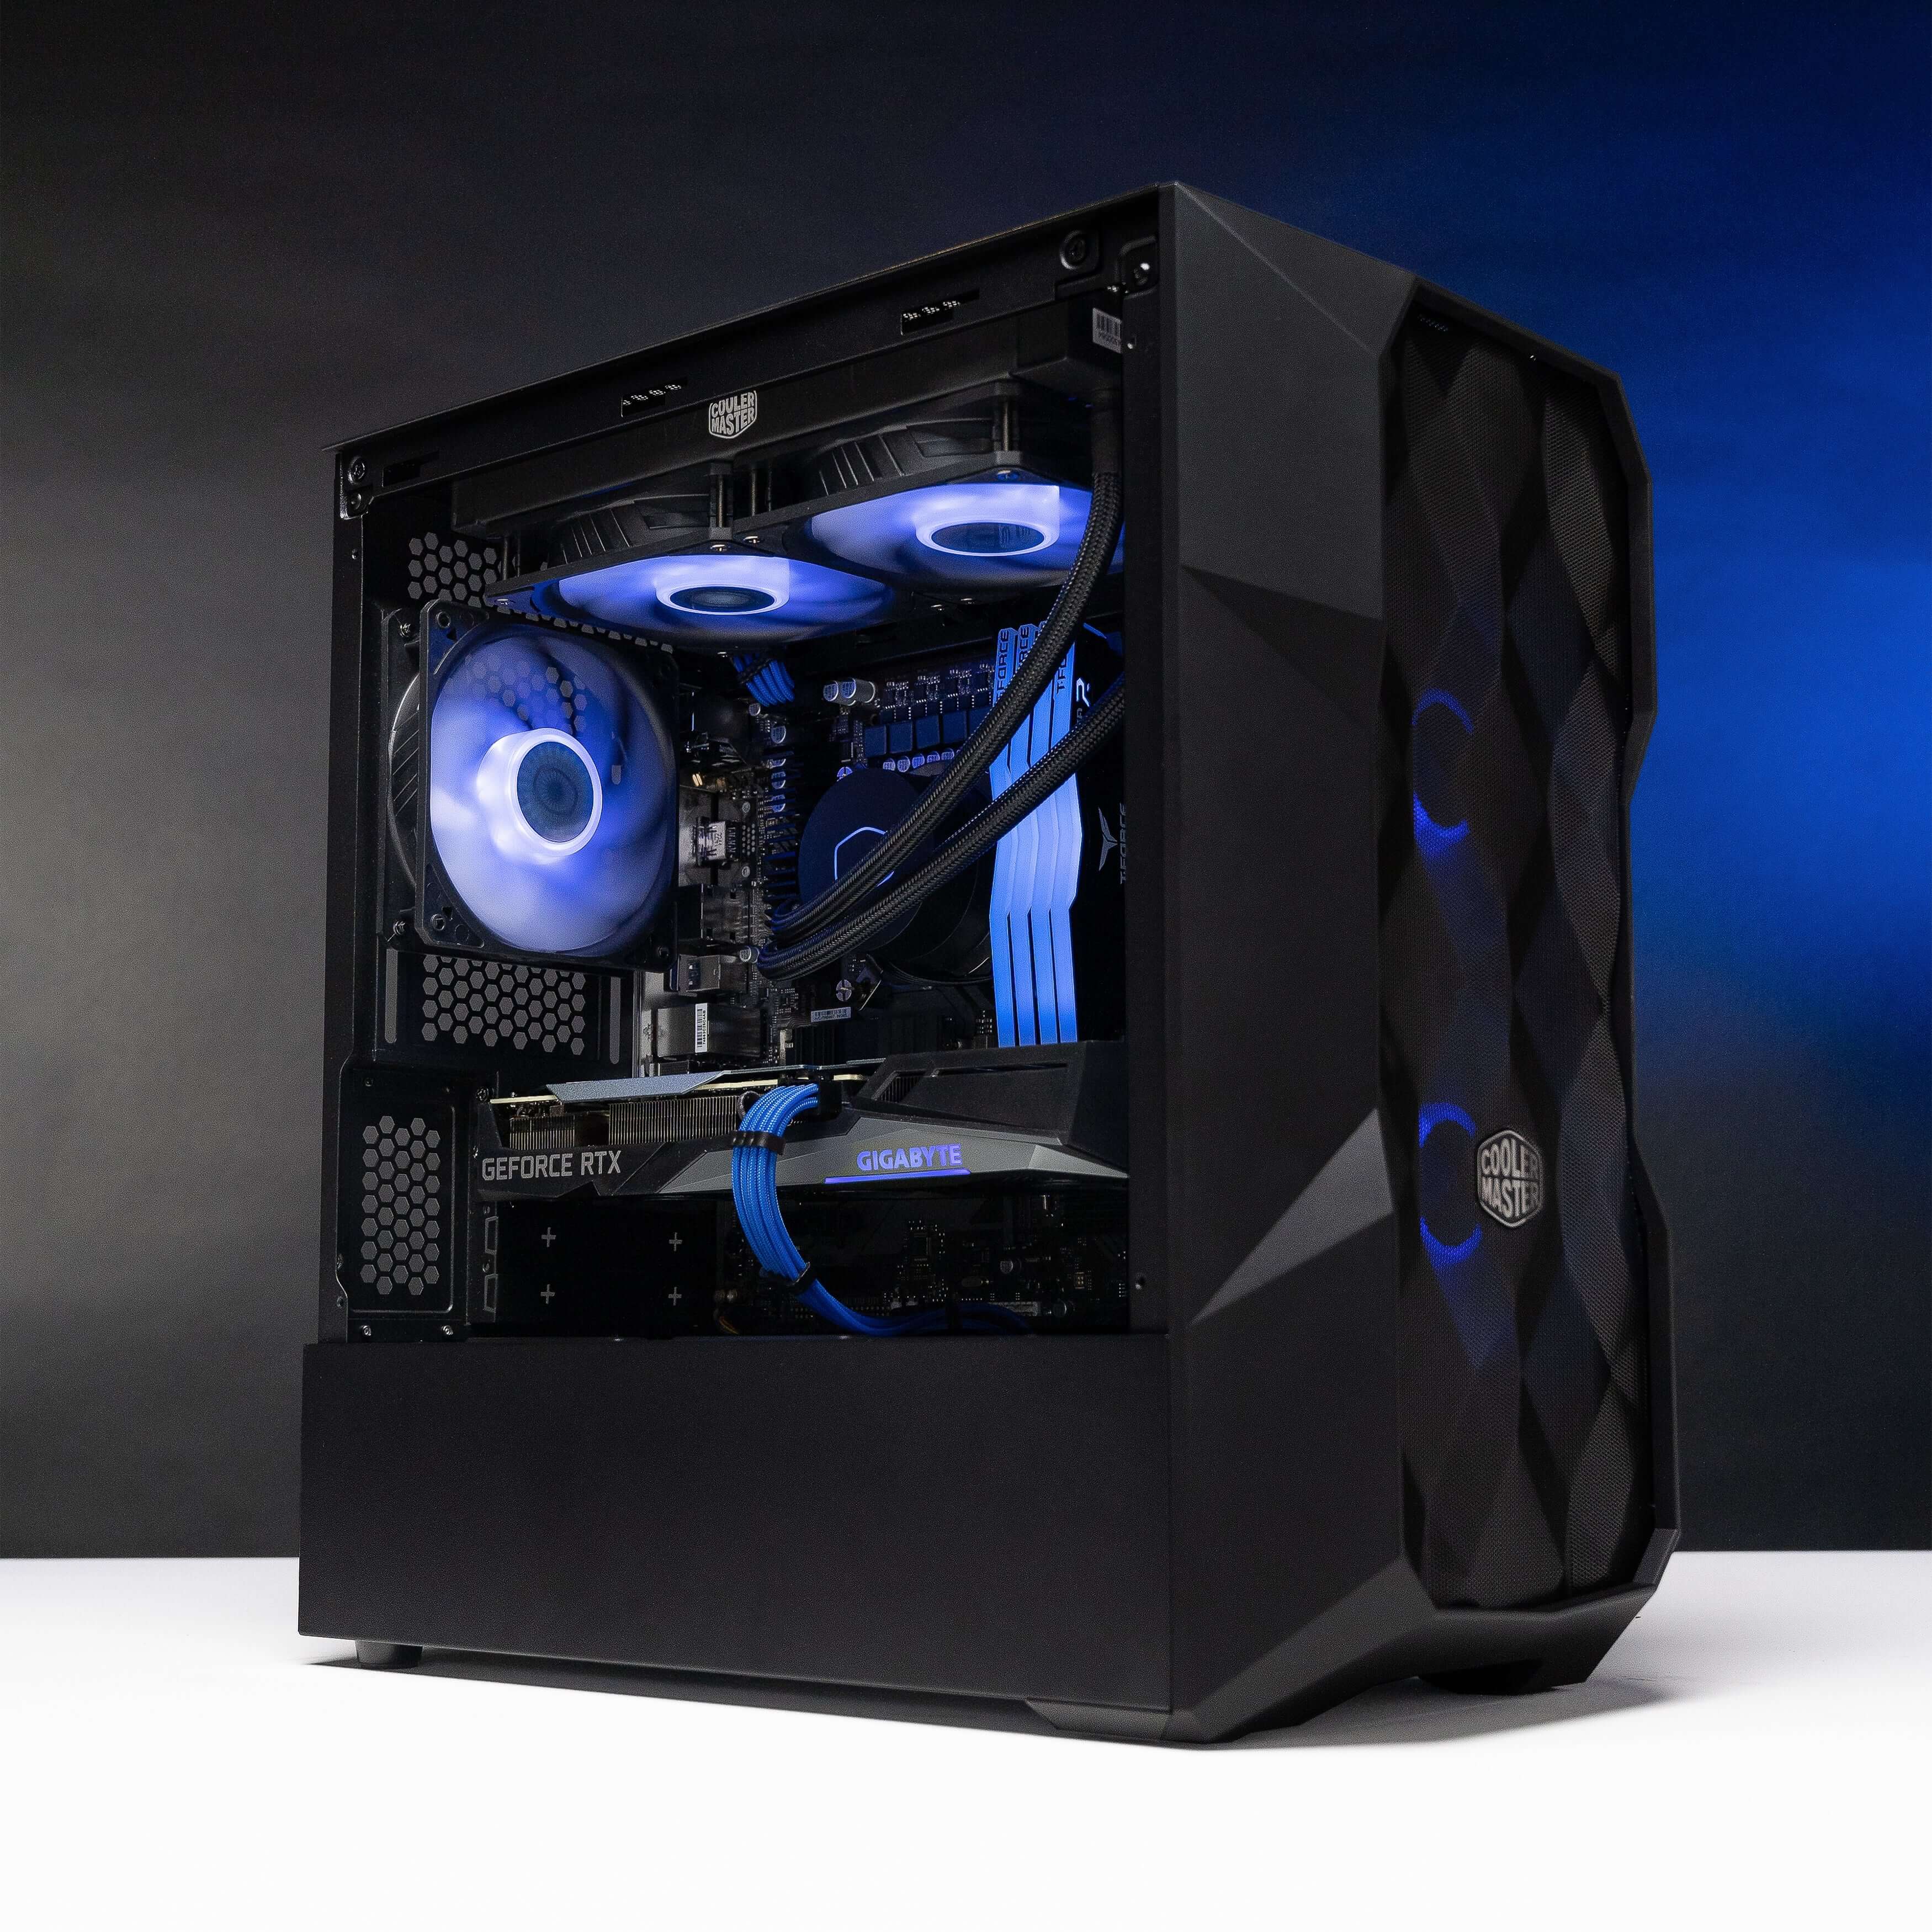 Collection of Glacier gaming PCs known for their powerful performance and stunning aesthetics